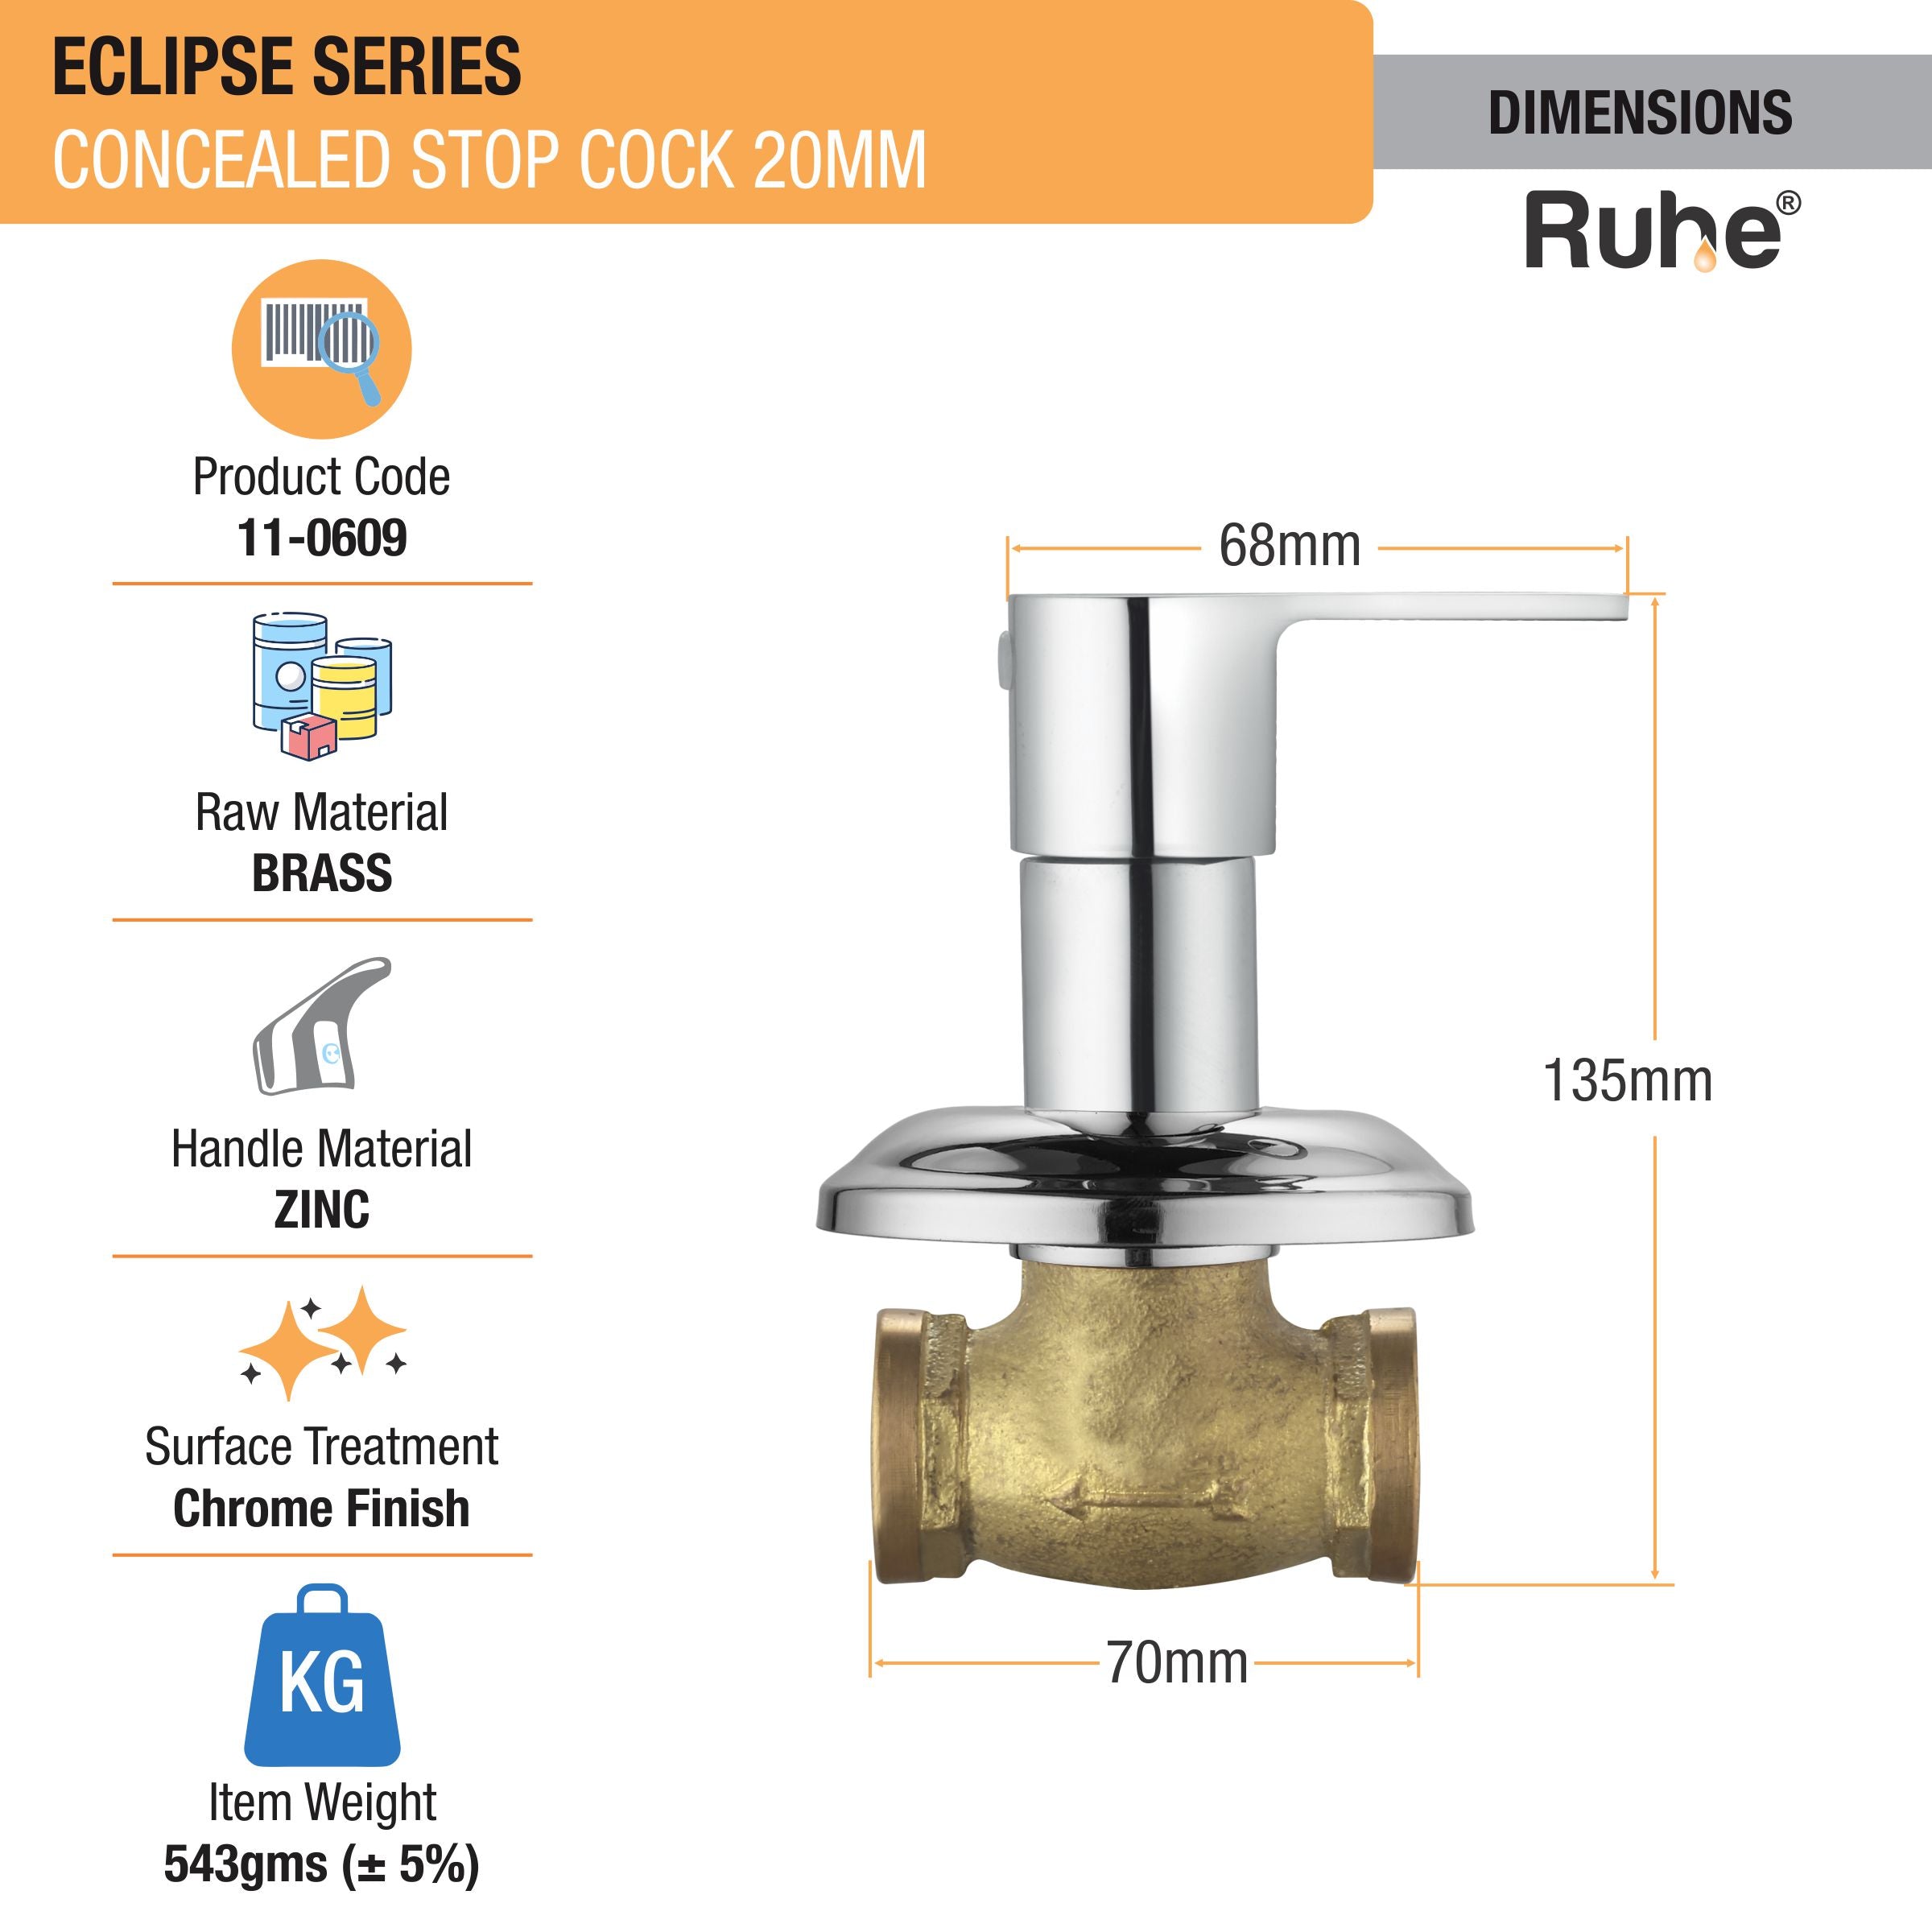 Eclipse Concealed Stop Valve Brass Faucet (20mm) dimensions and size